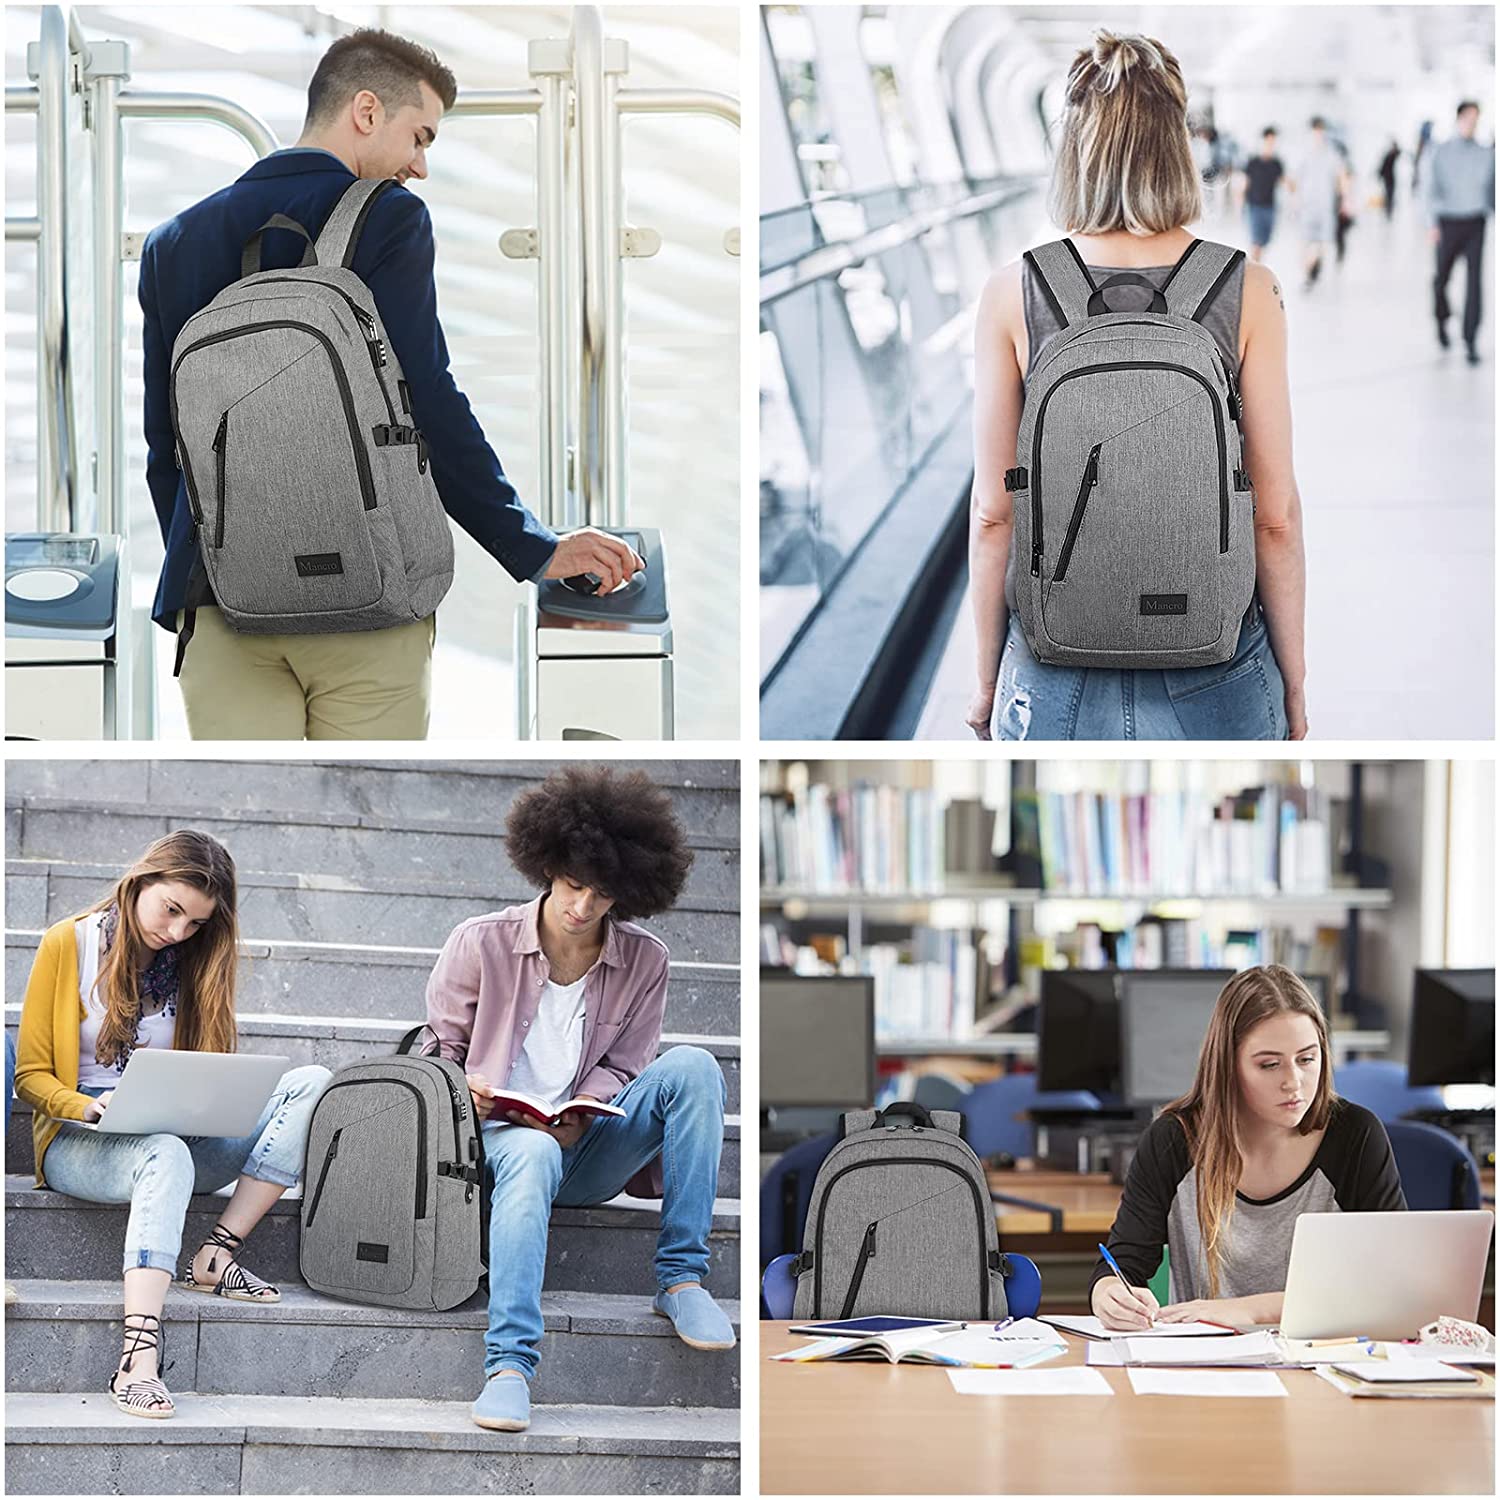 mancro business water resistant polyester laptop backpack with usb charging port and lock fits under 17-inch laptop and notebook, grey - image 4 of 9